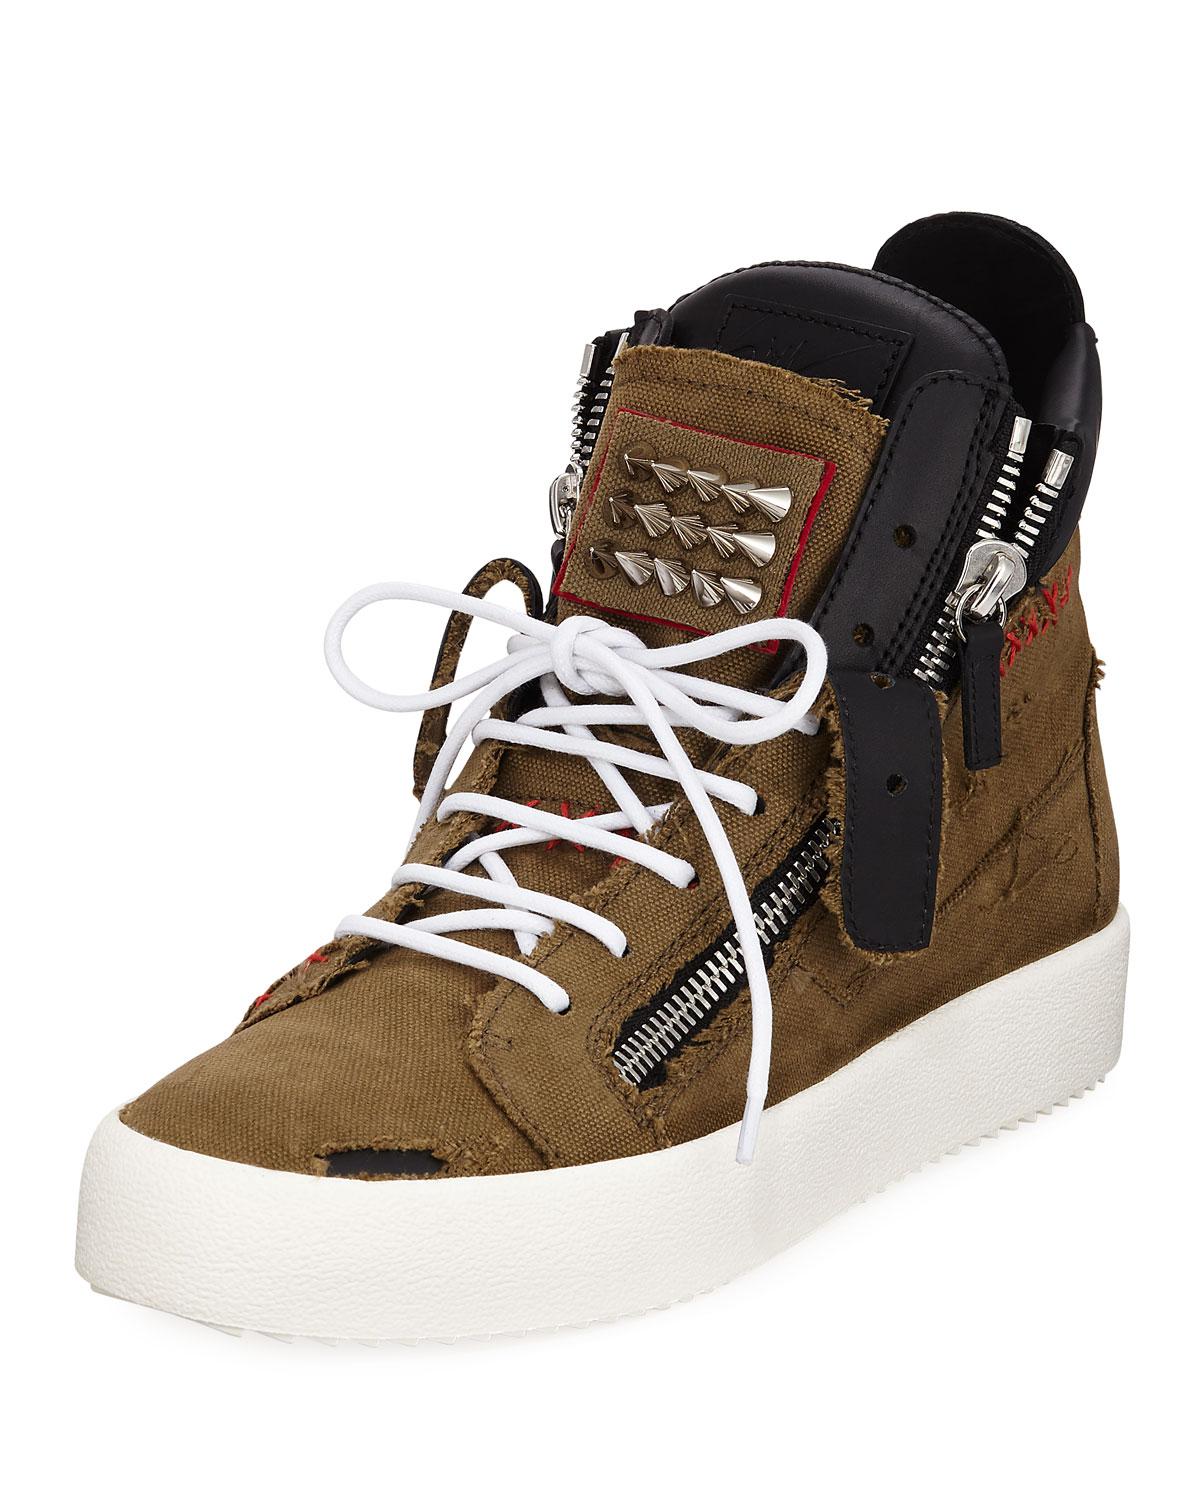 Chaos Studded High-top Sneakers 